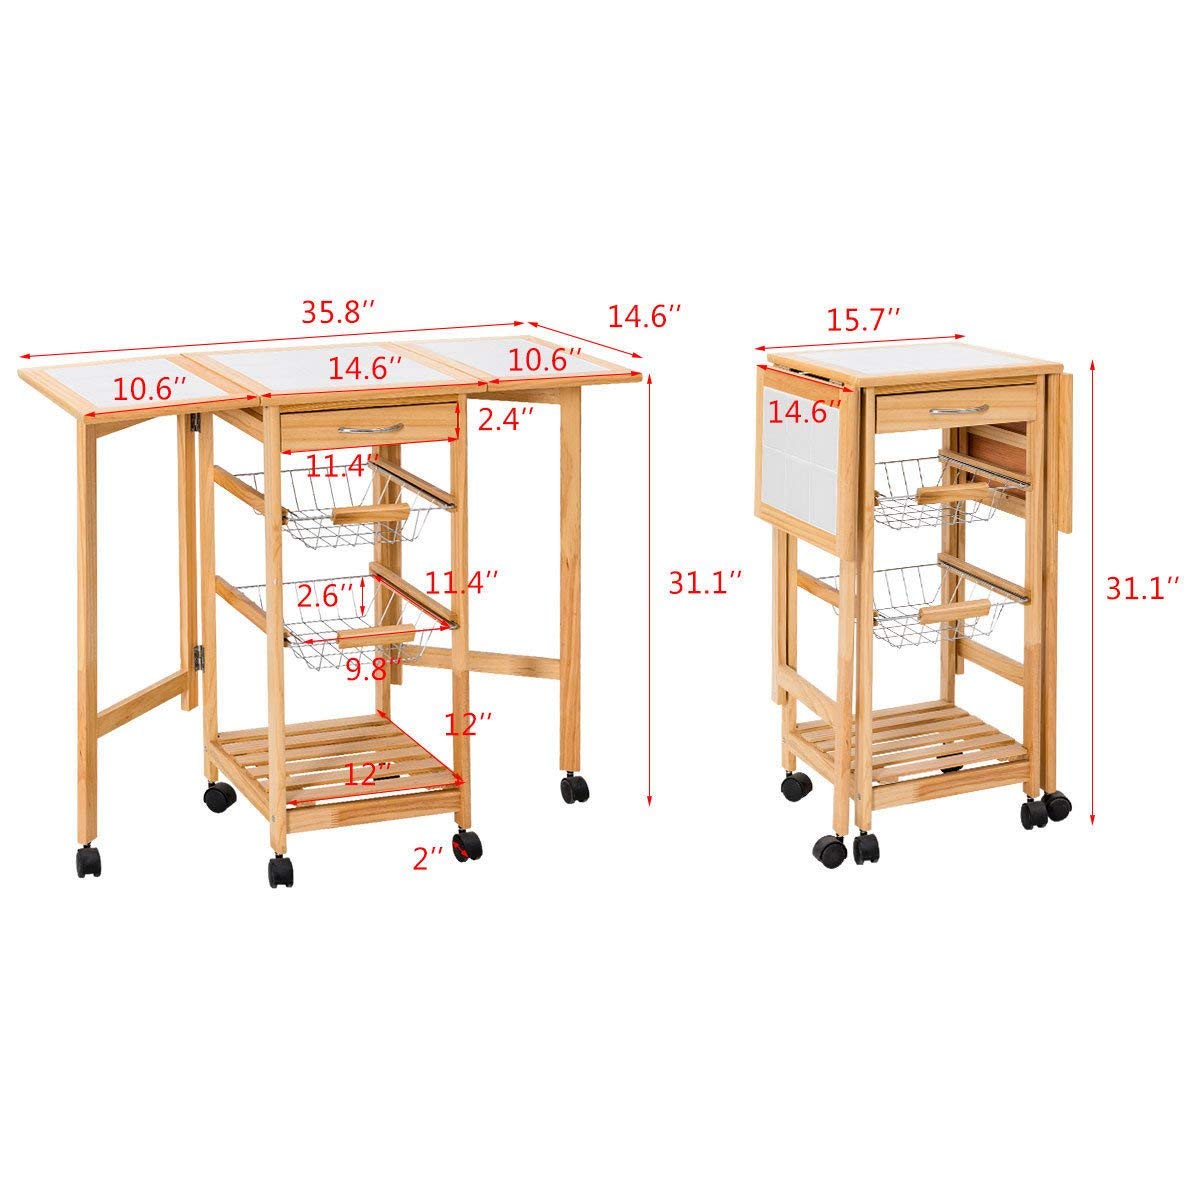 Professional Manufacture Foldable Design Kitchen Trolley Cart